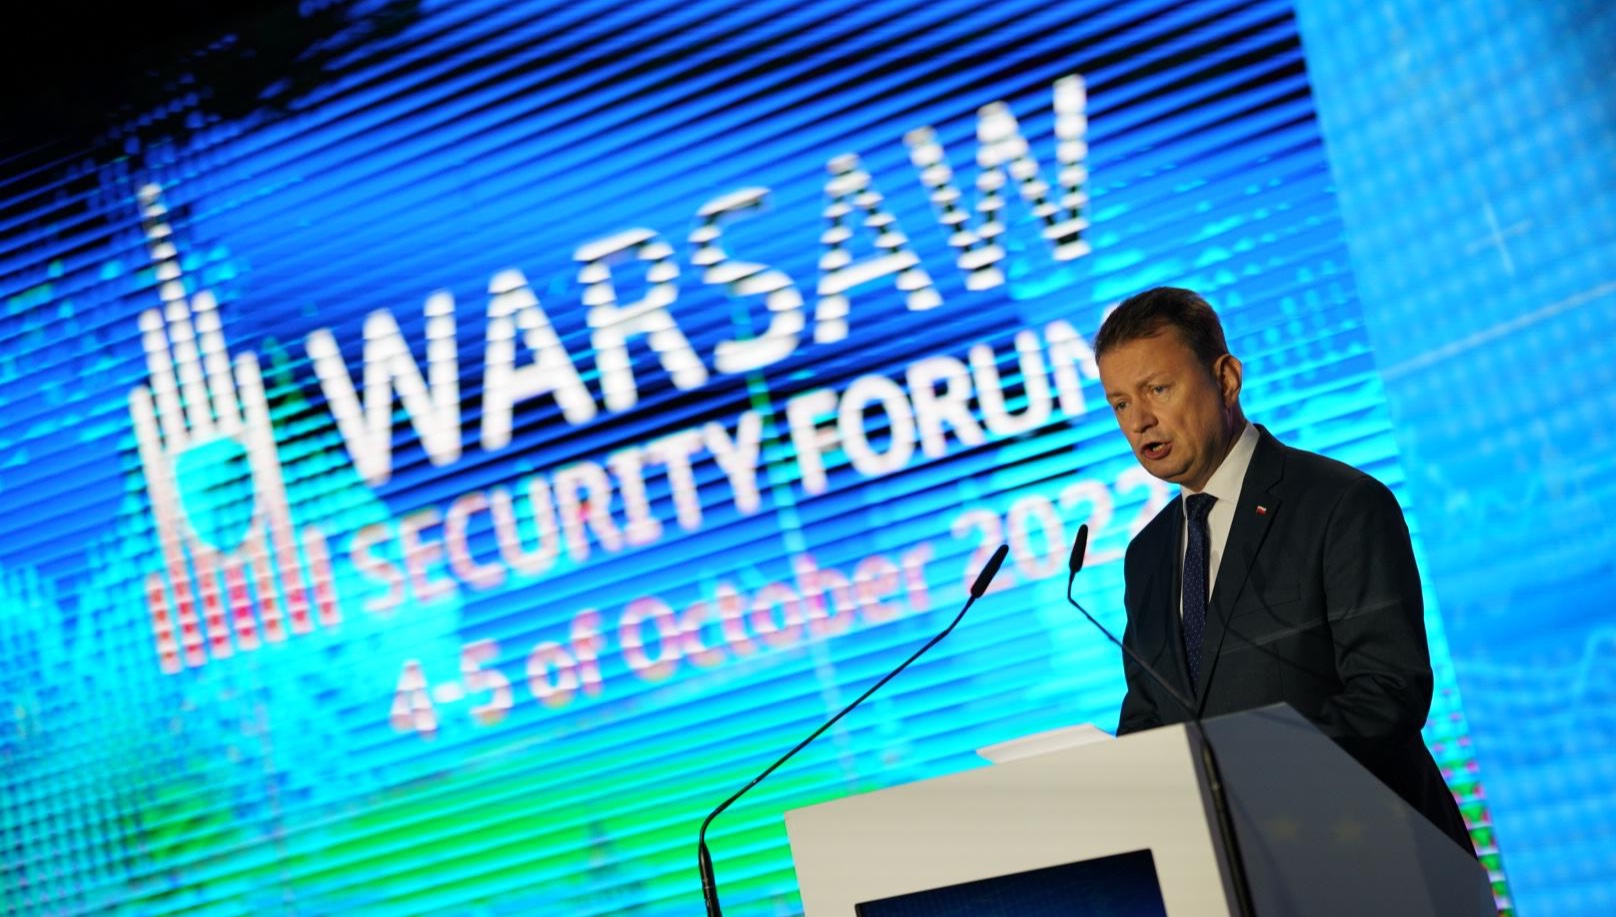 Warsaw Security Forum has started